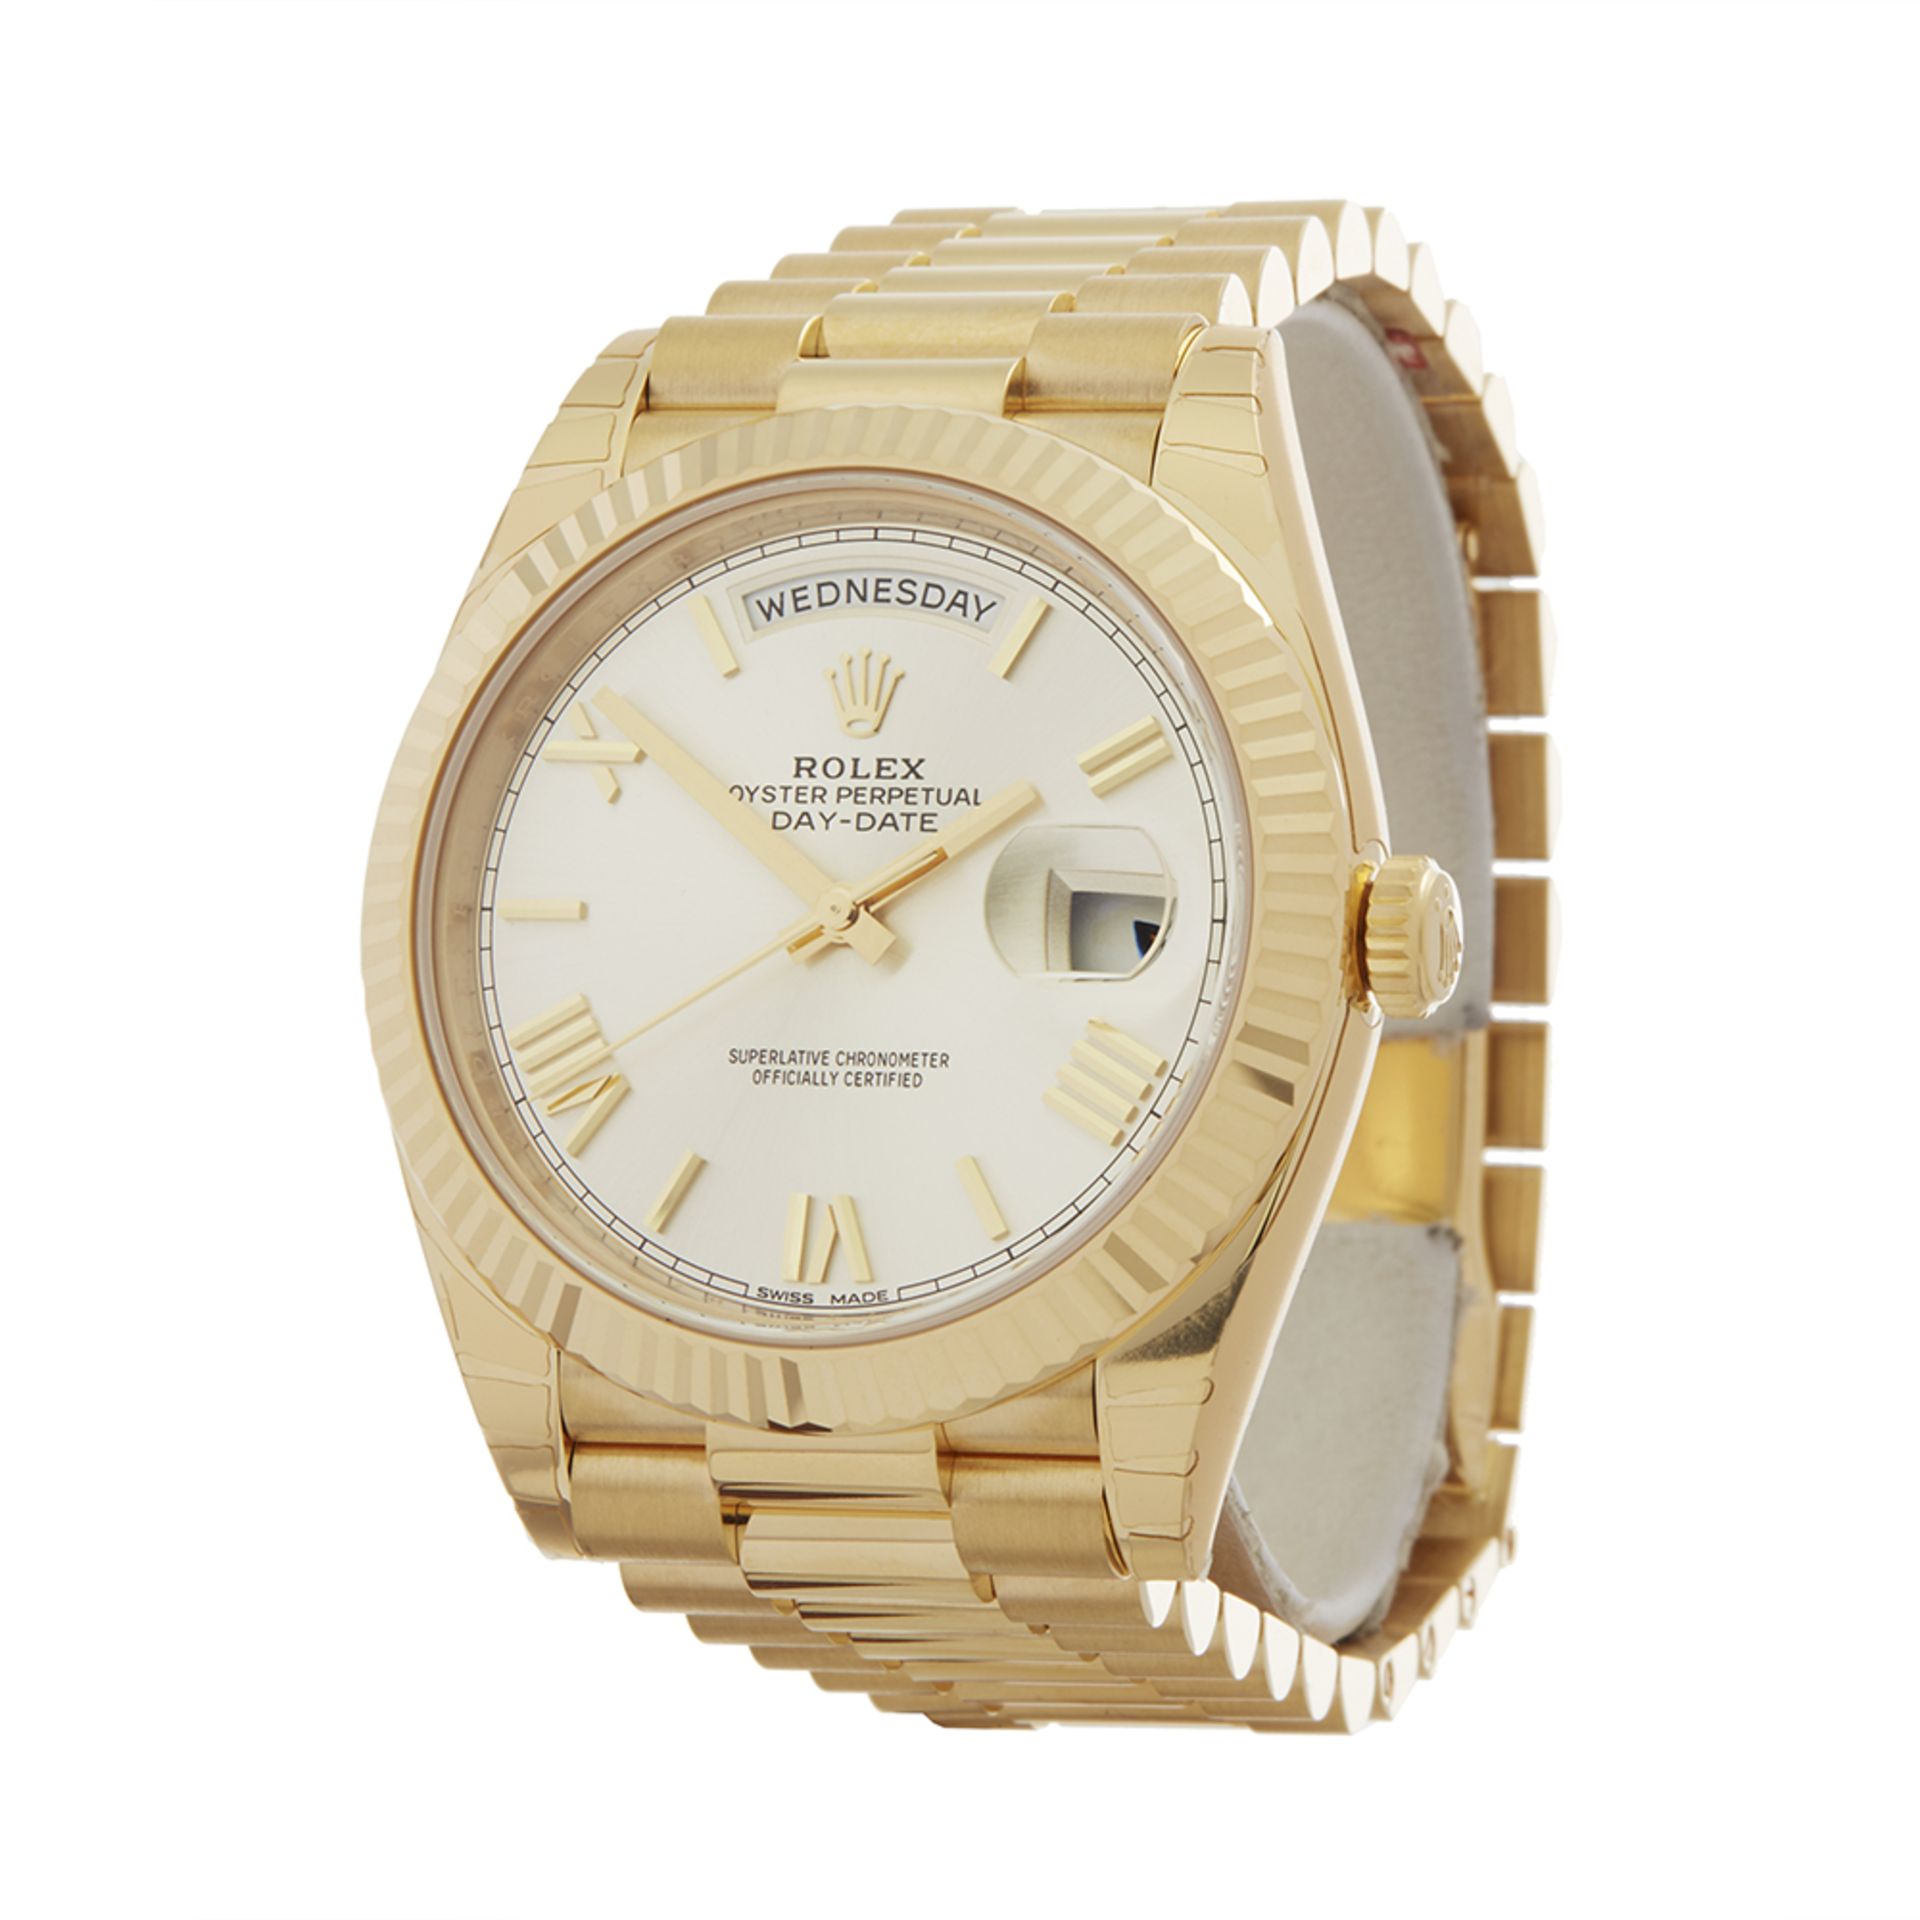 Rolex Day-Date 40 18k Yellow Gold - 228238 - Image 3 of 7